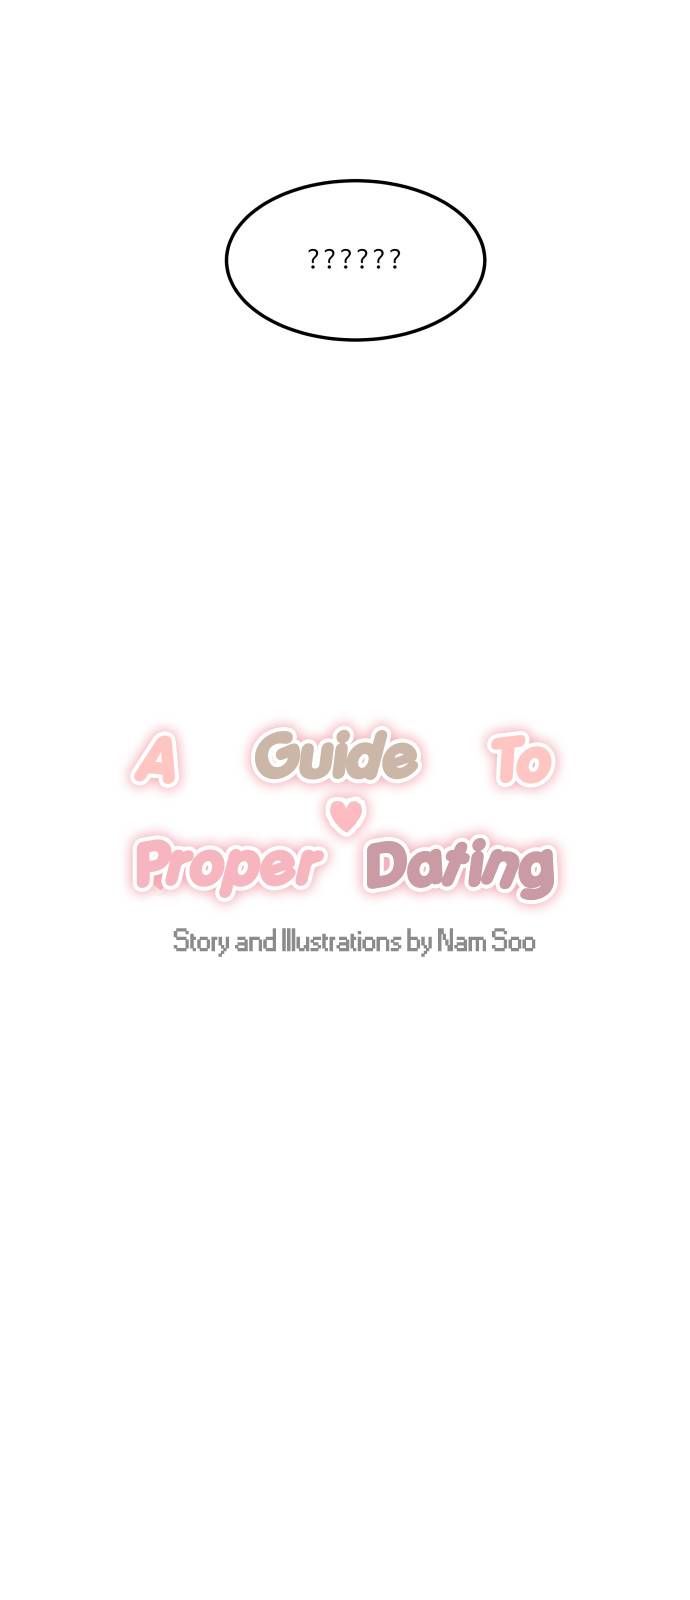 a_guide_to_proper_dating_12_4